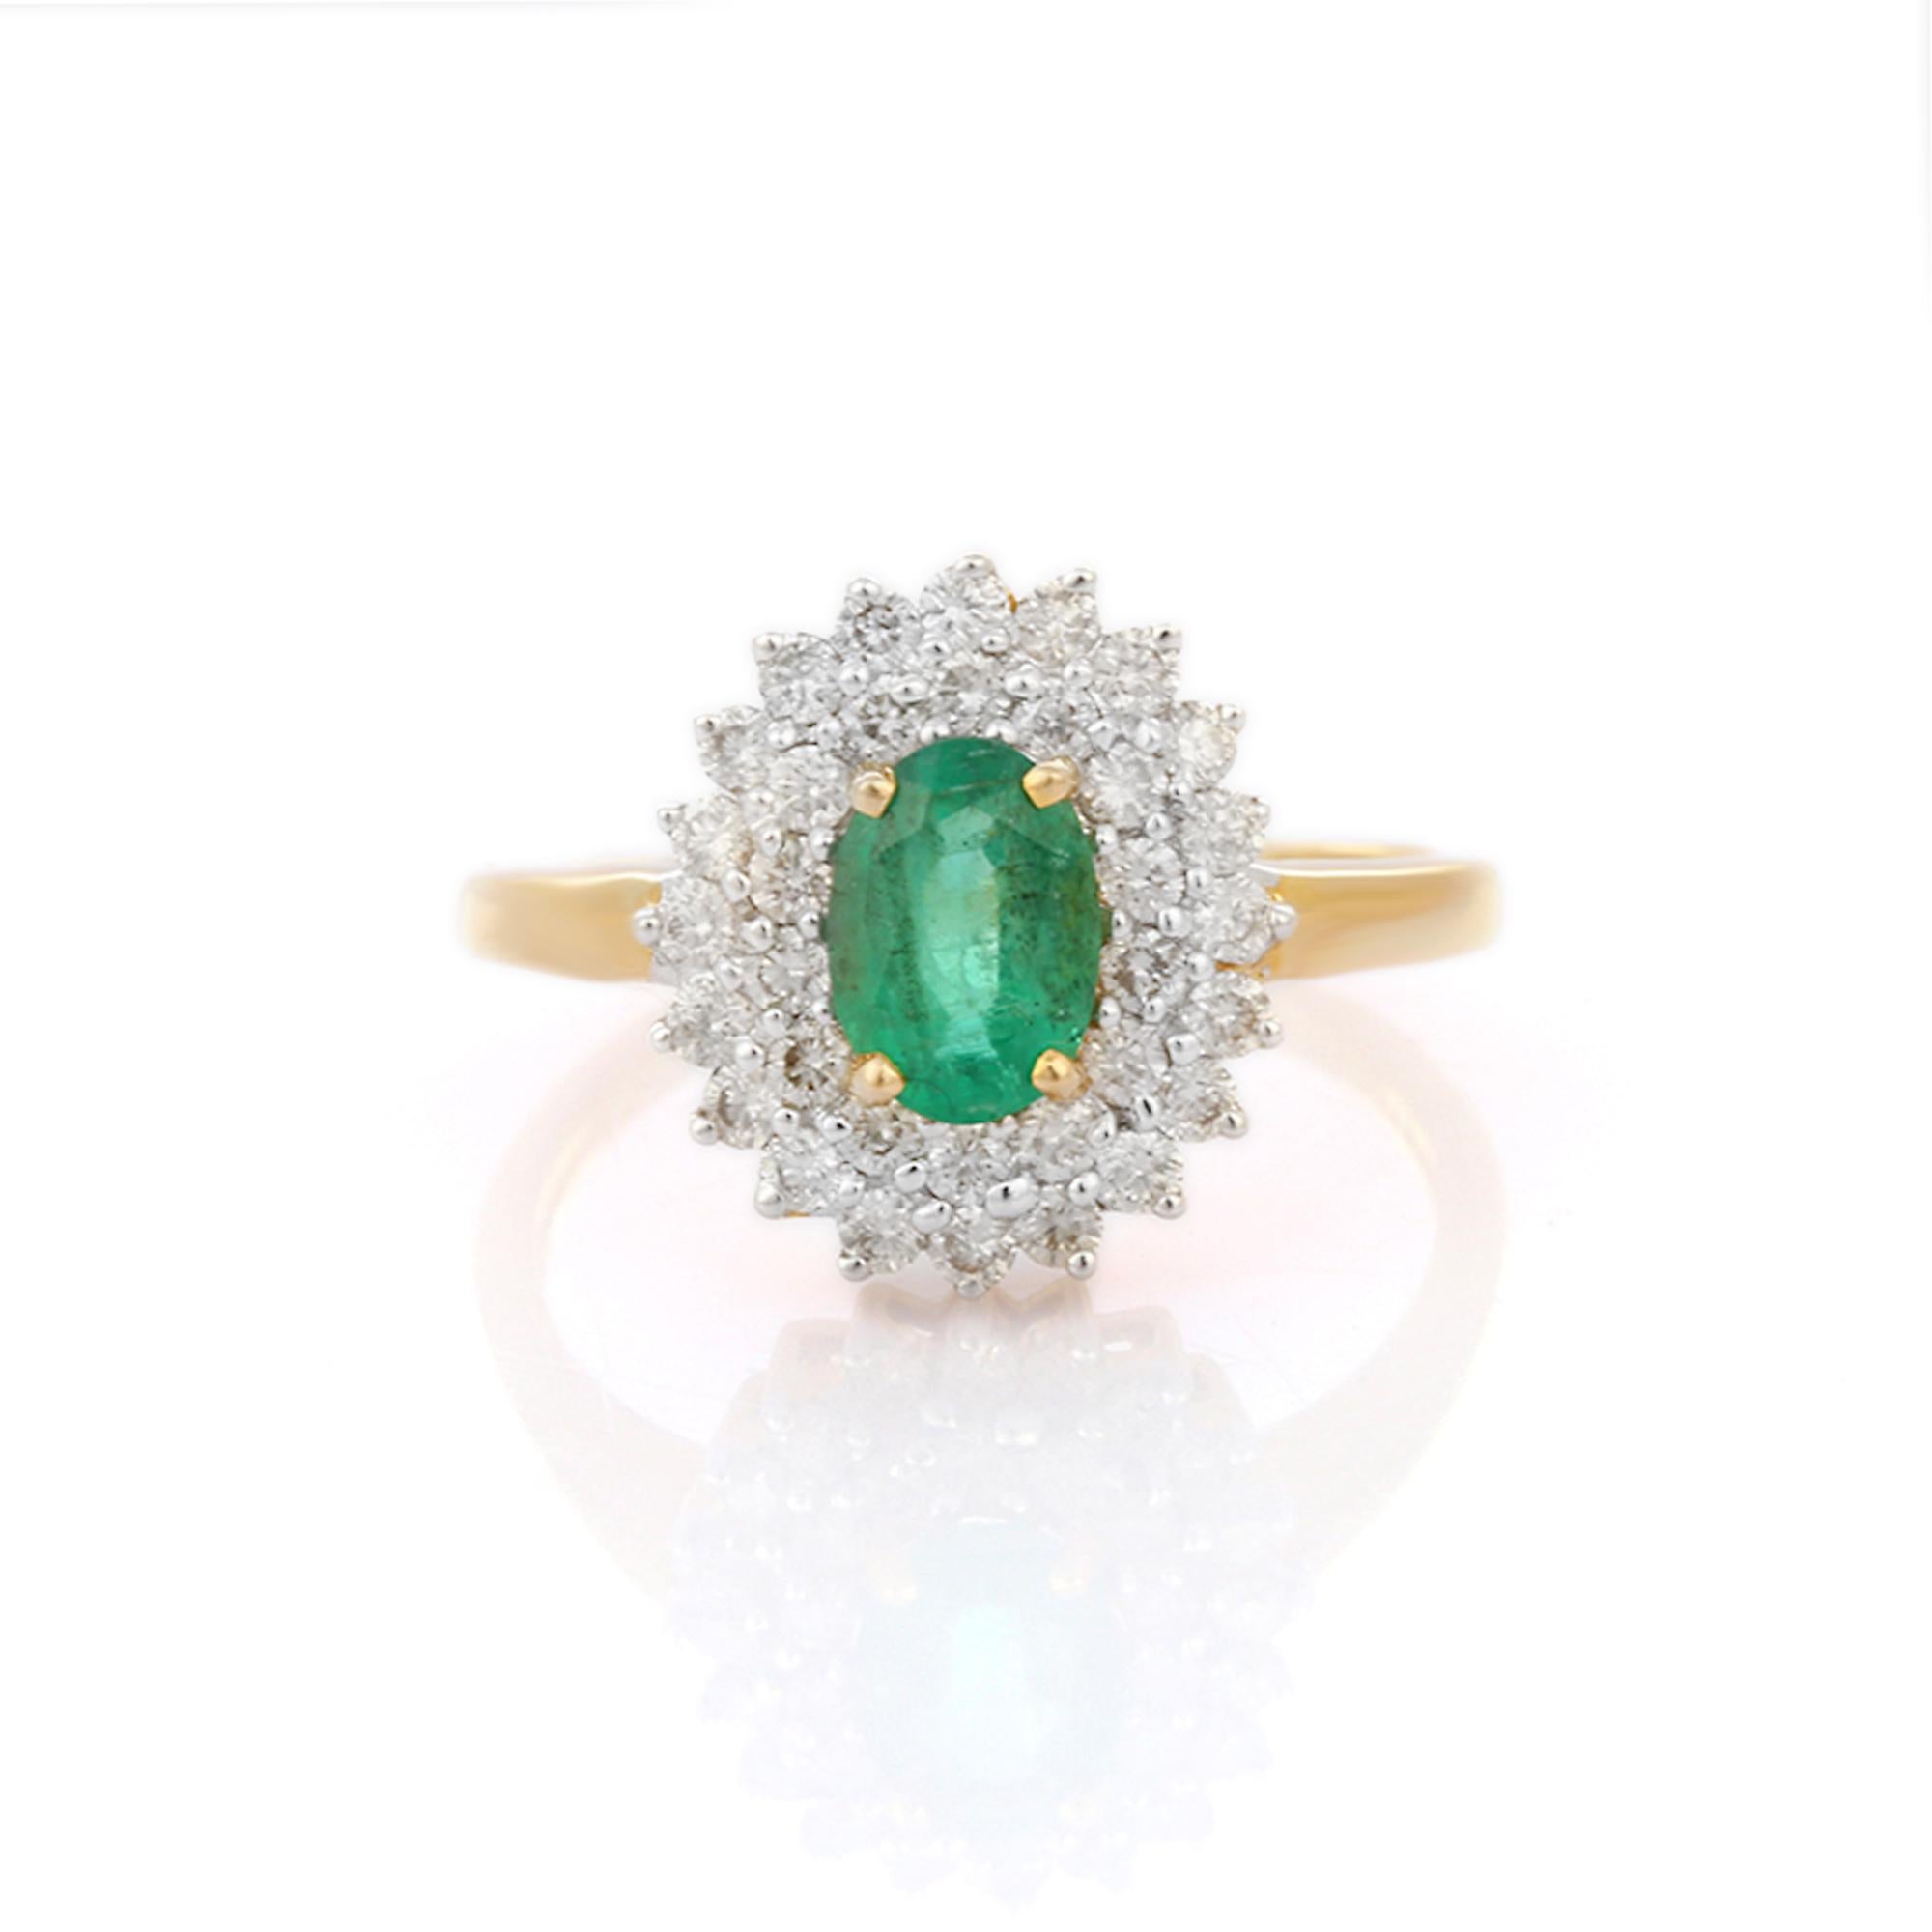 For Sale:  Exquisite 18K Yellow Gold Emerald Halo Diamond Engagement Wedding Ring for Her 5